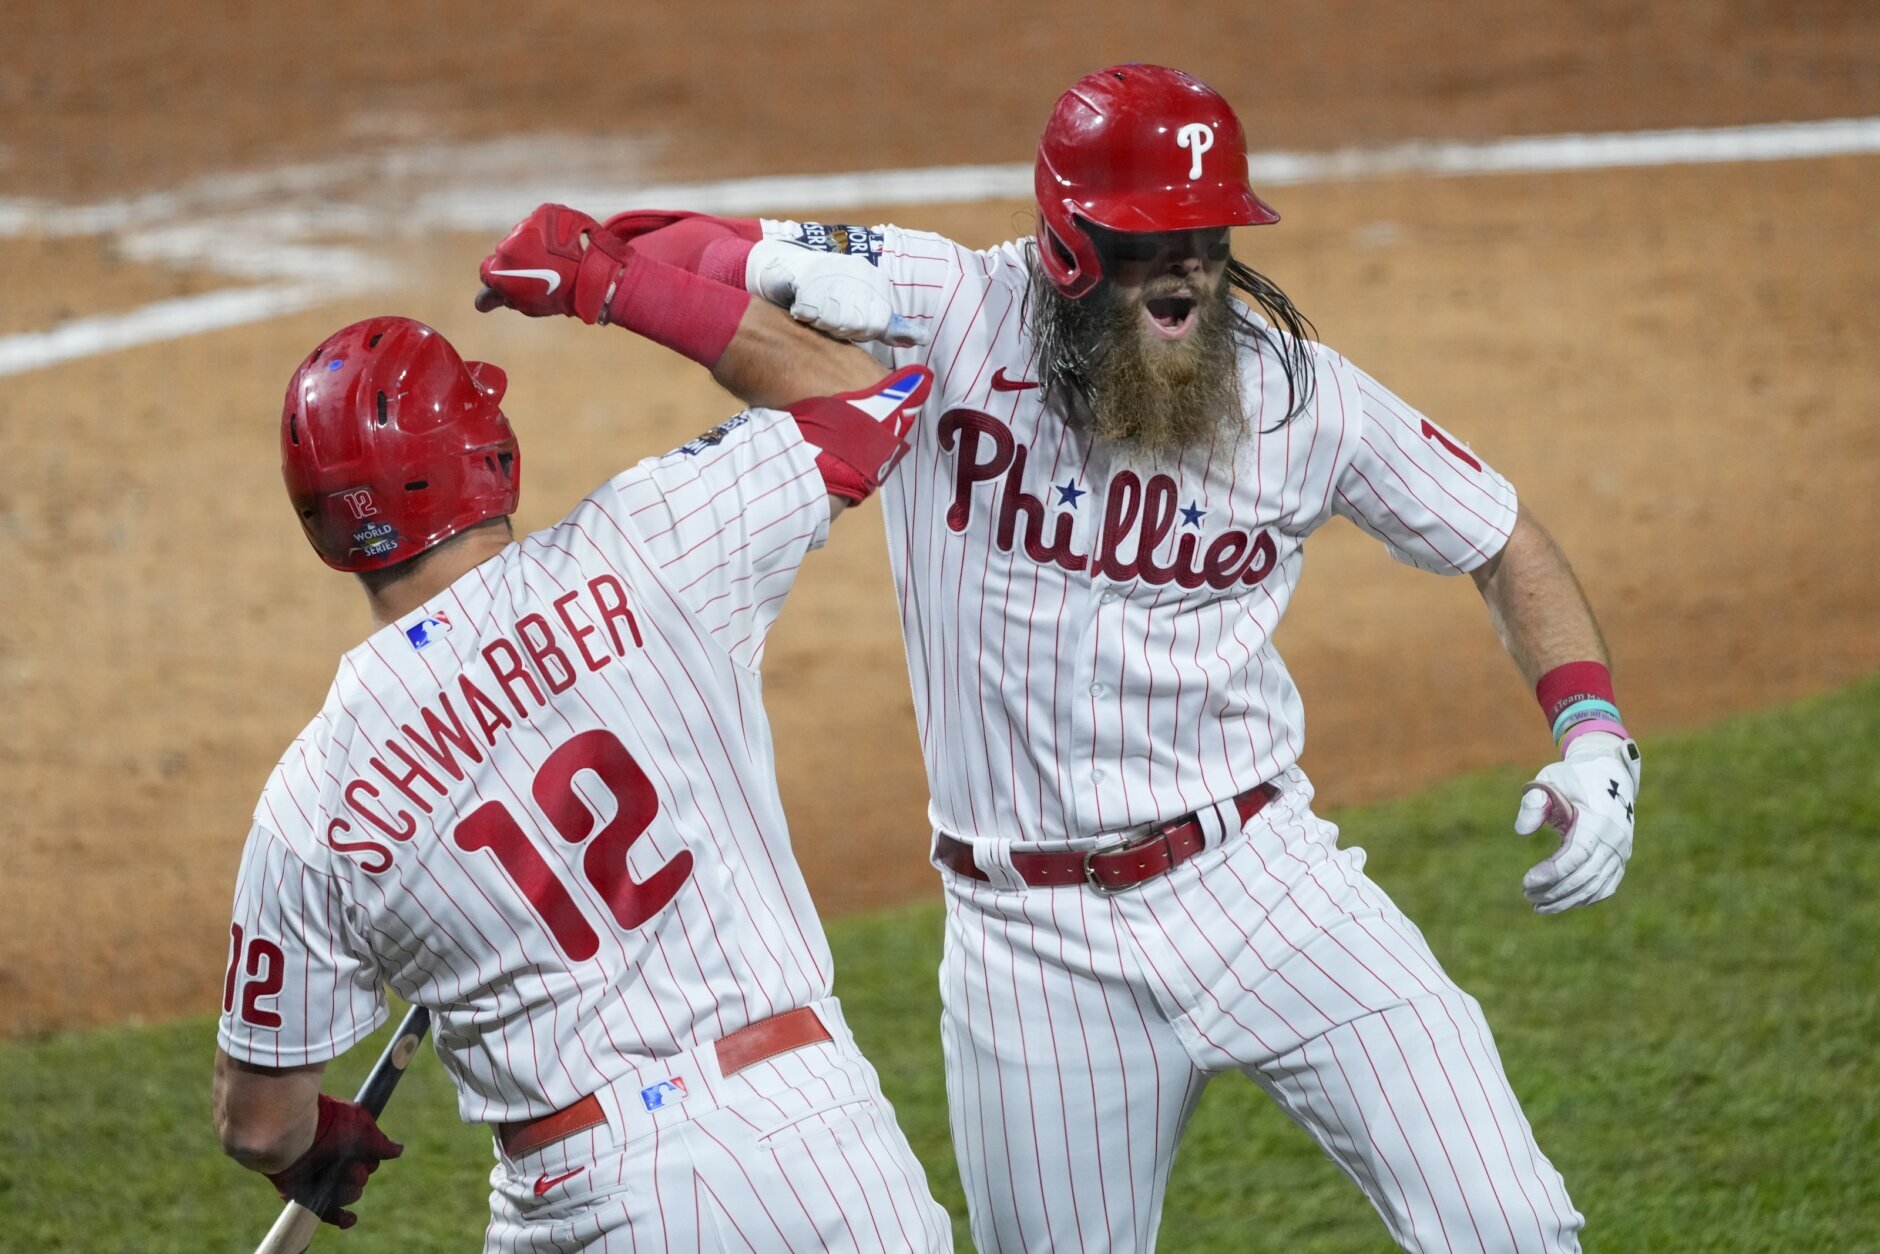 Ava's Angle: The changes that propelled the Phillies to the World Series